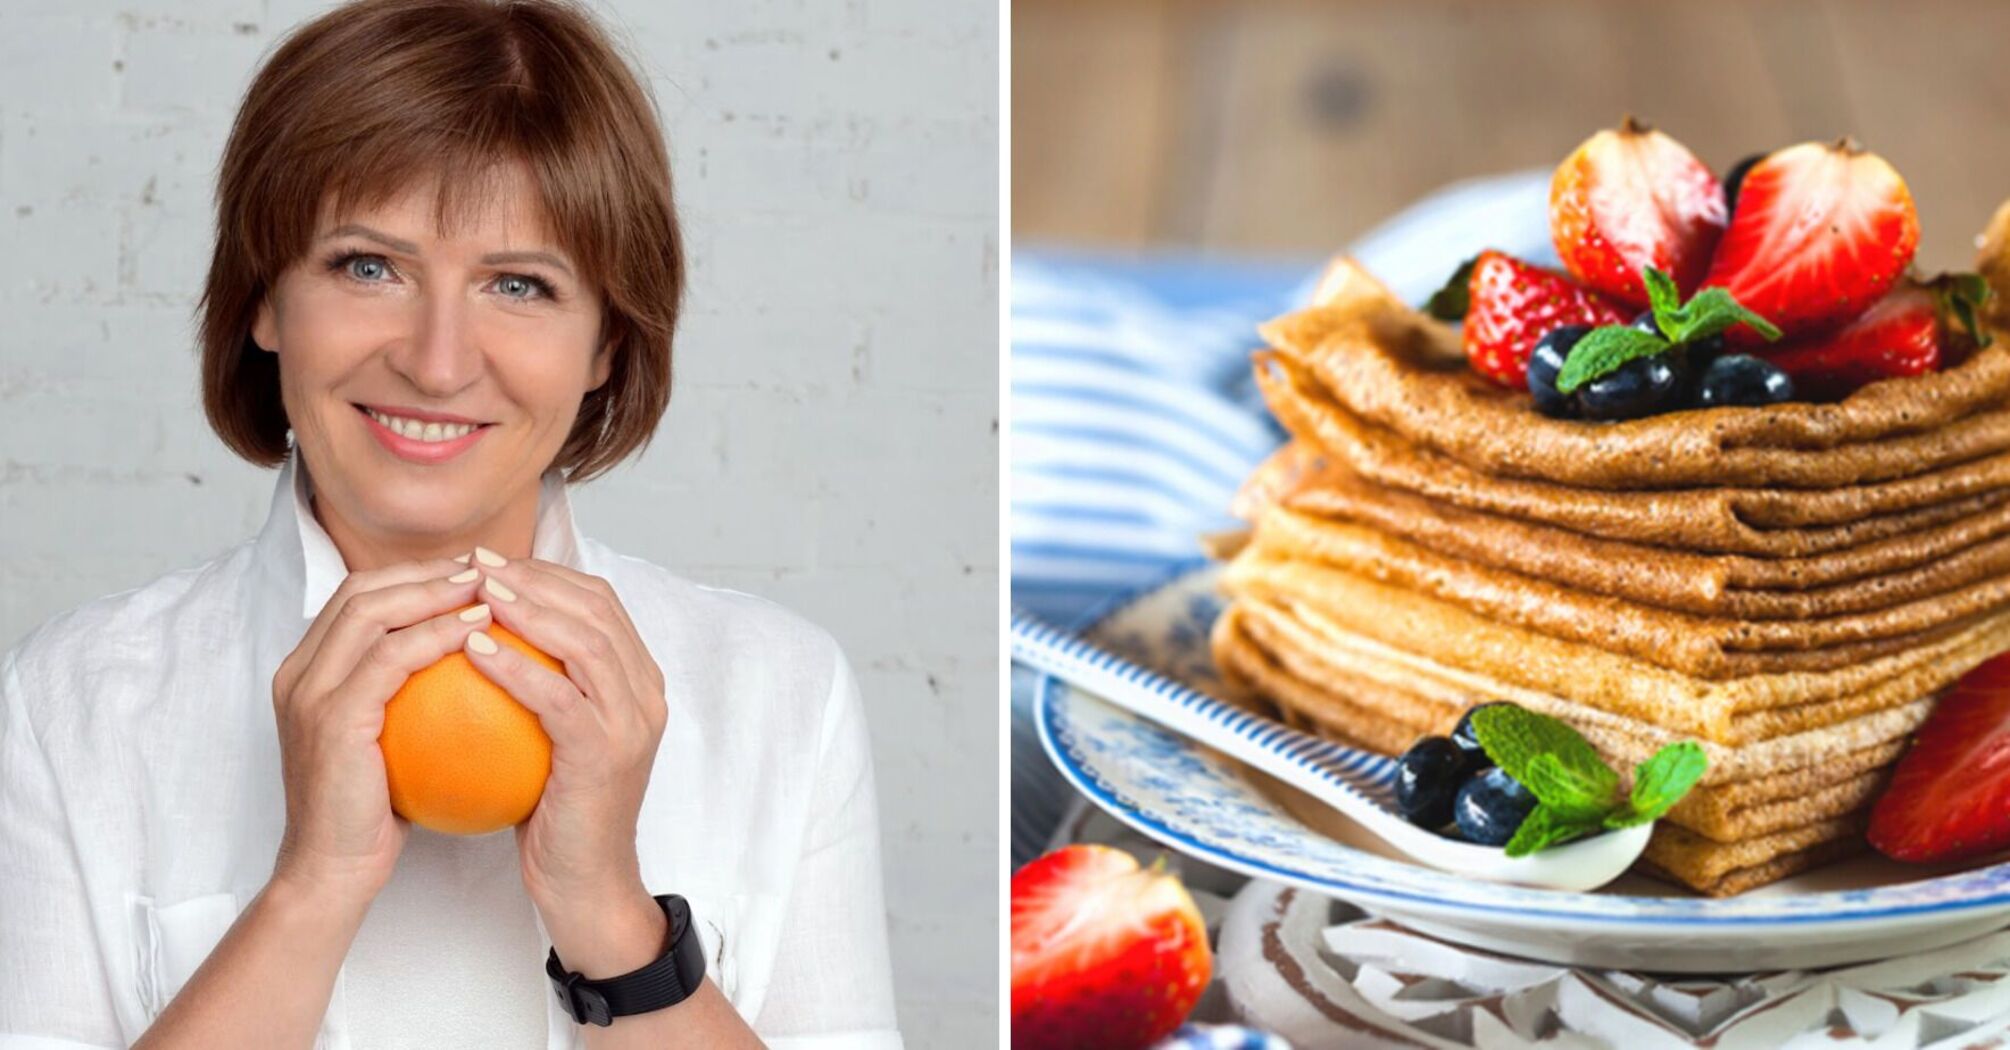 Healthy pancakes from Svitlana Fus: ideas for simple fillings